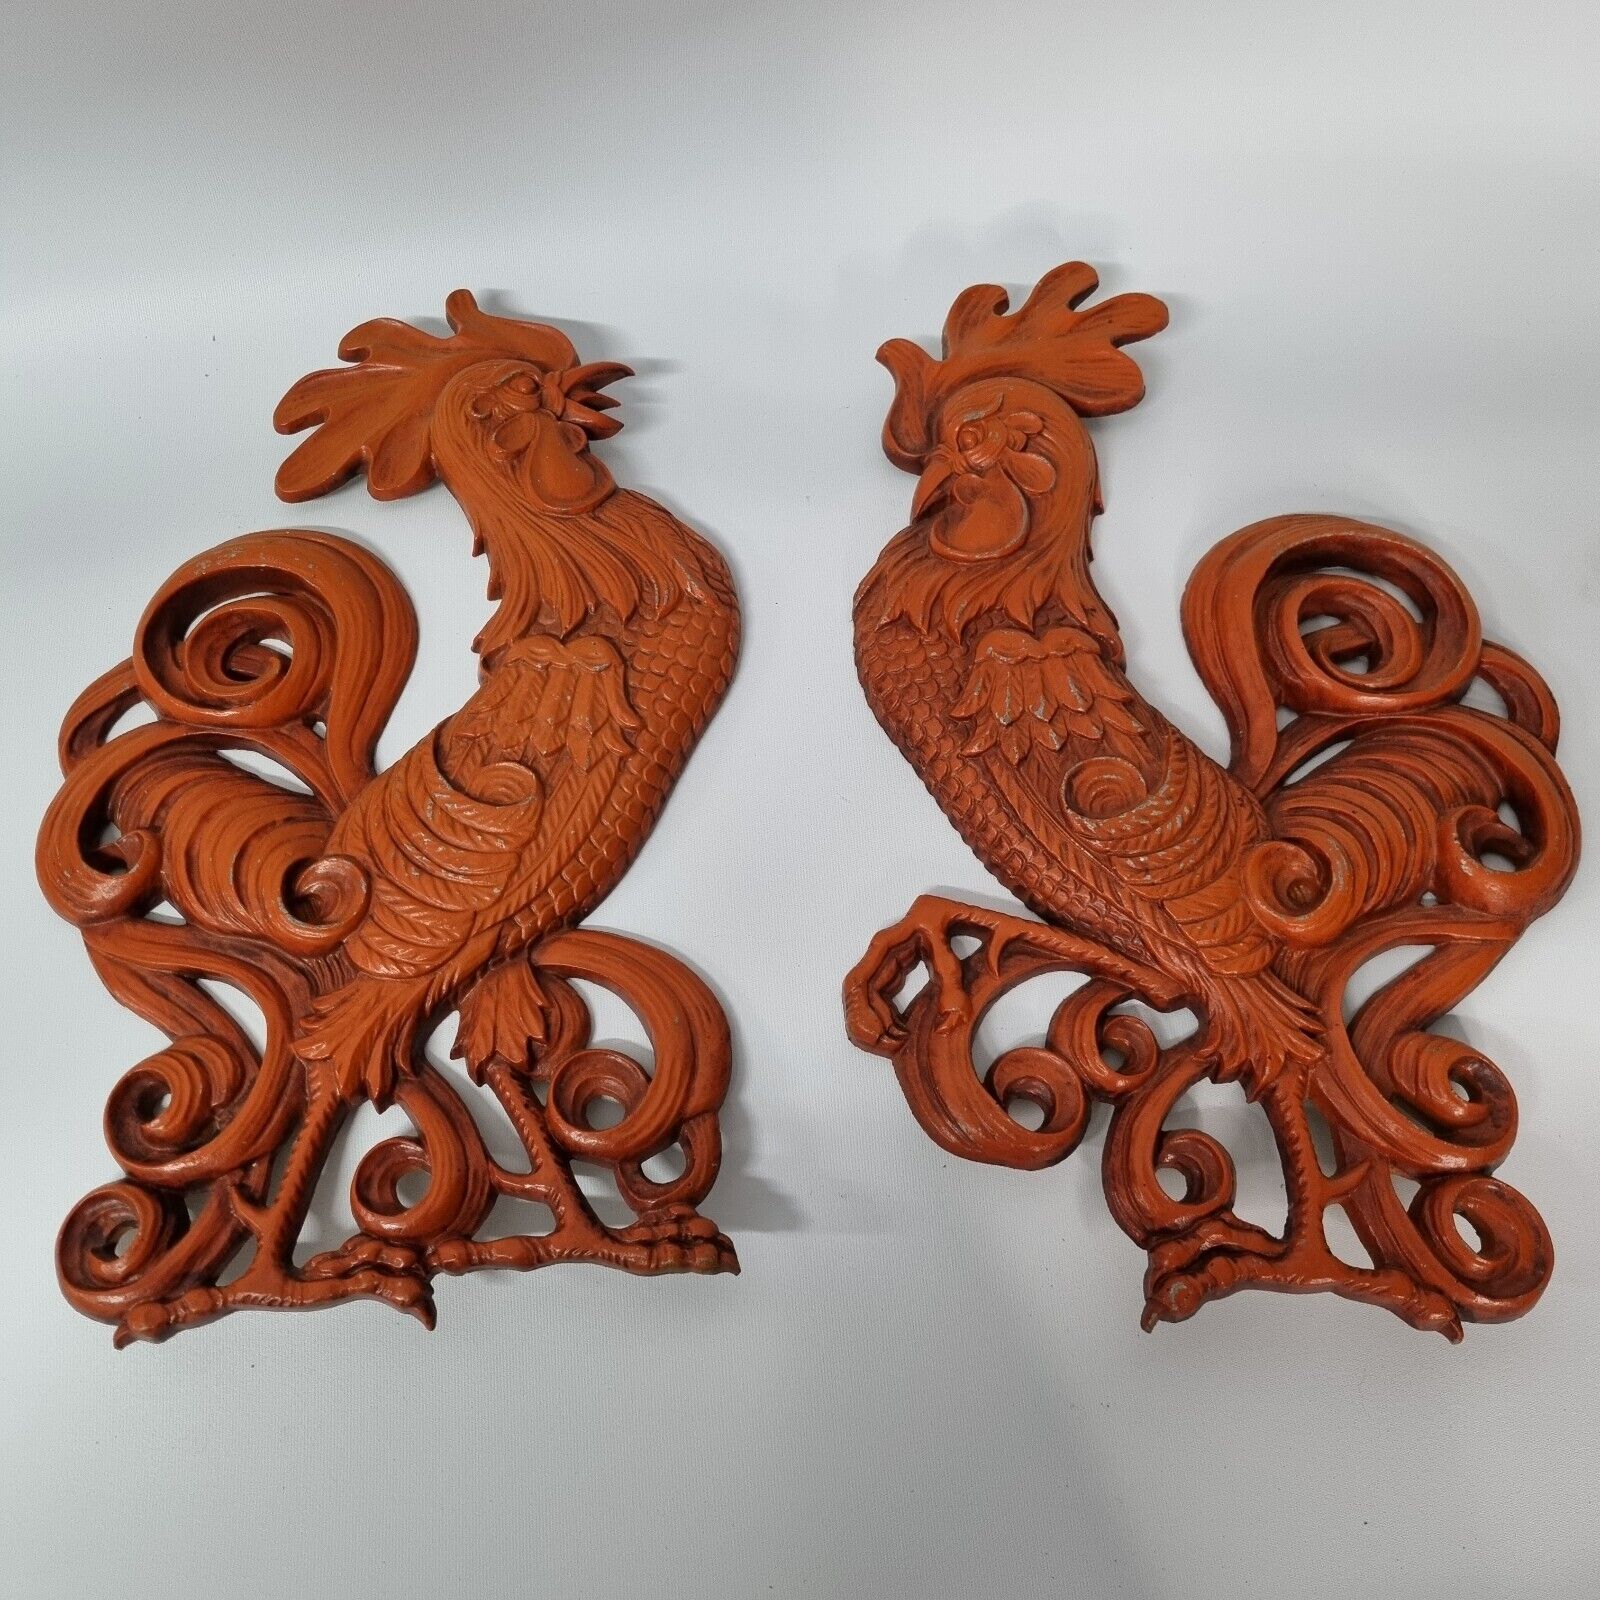 2 Pc Set Vintage Sexton MCM Fighting Roosters Red Metal Wall Decor Hangings USA